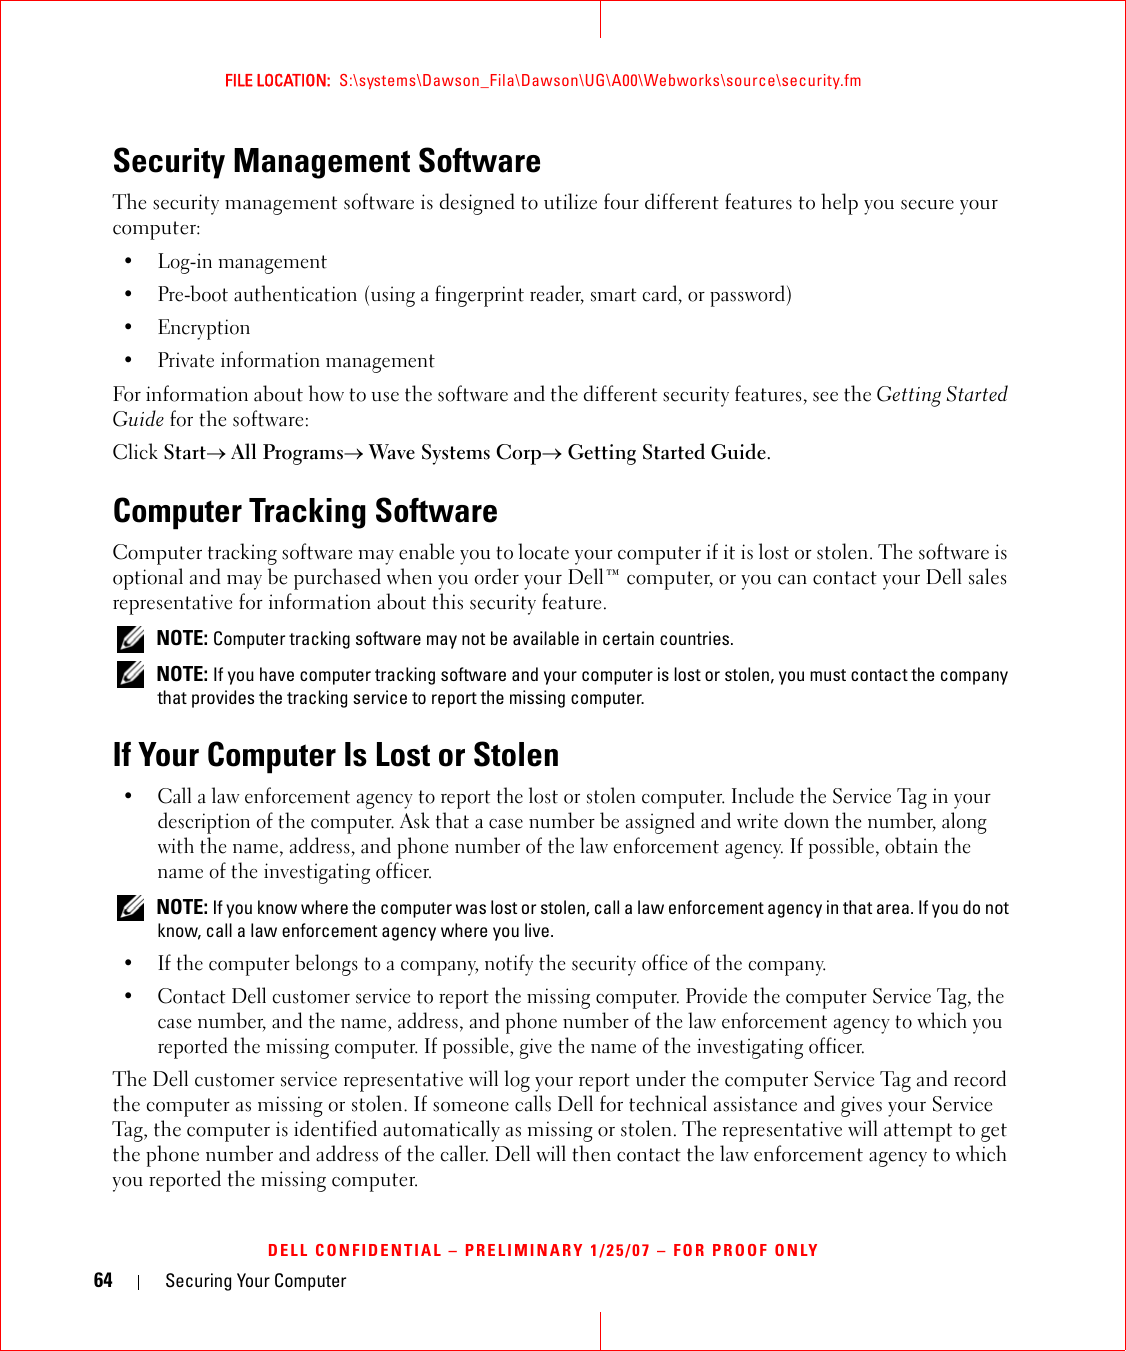 64 Securing Your ComputerFILE LOCATION:  S:\systems\Dawson_Fila\Dawson\UG\A00\Webworks\source\security.fmDELL CONFIDENTIAL – PRELIMINARY 1/25/07 – FOR PROOF ONLYSecurity Management SoftwareThe security management software is designed to utilize four different features to help you secure your computer:• Log-in management• Pre-boot authentication (using a fingerprint reader, smart card, or password)•Encryption• Private information managementFor information about how to use the software and the different security features, see the Getting Started Guide for the software: Click Start→ All Programs→ Wave Systems Corp→ Getting Started Guide.Computer Tracking SoftwareComputer tracking software may enable you to locate your computer if it is lost or stolen. The software is optional and may be purchased when you order your Dell™ computer, or you can contact your Dell sales representative for information about this security feature. NOTE: Computer tracking software may not be available in certain countries. NOTE: If you have computer tracking software and your computer is lost or stolen, you must contact the company that provides the tracking service to report the missing computer.If Your Computer Is Lost or Stolen• Call a law enforcement agency to report the lost or stolen computer. Include the Service Tag in your description of the computer. Ask that a case number be assigned and write down the number, along with the name, address, and phone number of the law enforcement agency. If possible, obtain the name of the investigating officer. NOTE: If you know where the computer was lost or stolen, call a law enforcement agency in that area. If you do not know, call a law enforcement agency where you live.• If the computer belongs to a company, notify the security office of the company.• Contact Dell customer service to report the missing computer. Provide the computer Service Tag, the case number, and the name, address, and phone number of the law enforcement agency to which you reported the missing computer. If possible, give the name of the investigating officer.The Dell customer service representative will log your report under the computer Service Tag and record the computer as missing or stolen. If someone calls Dell for technical assistance and gives your Service Tag, the computer is identified automatically as missing or stolen. The representative will attempt to get the phone number and address of the caller. Dell will then contact the law enforcement agency to which you reported the missing computer.